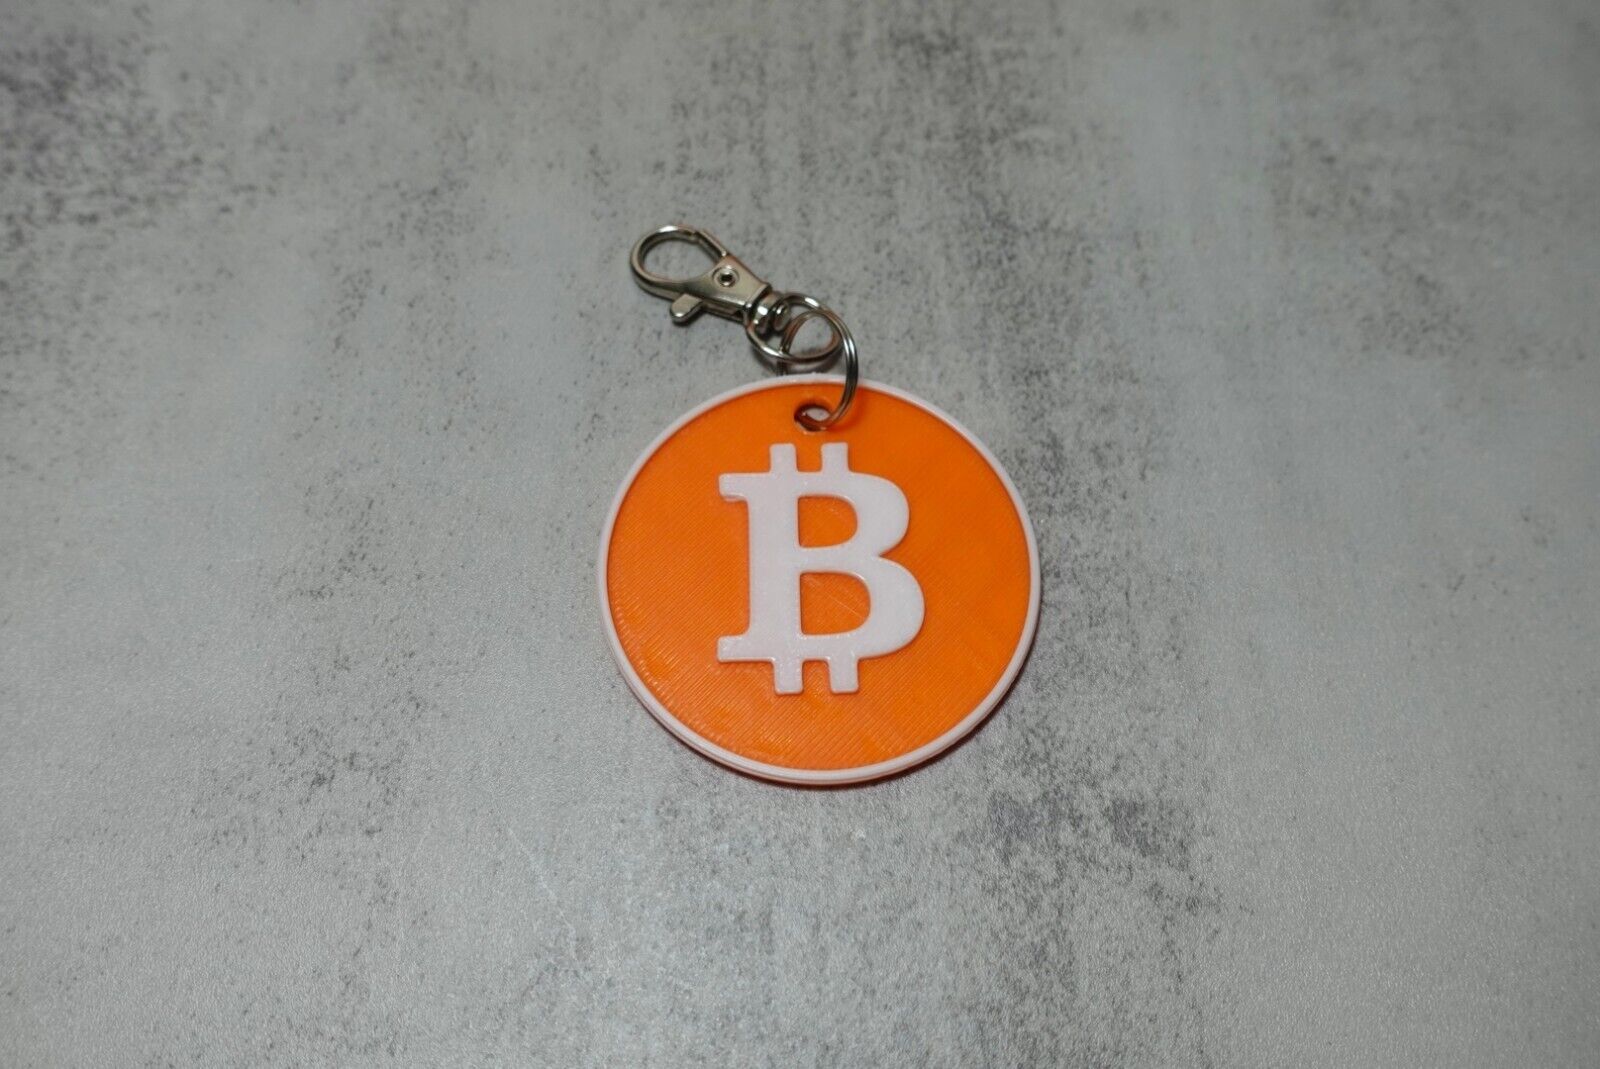 Bitcoin Keychain Collectable Coin or Wall Decor 3D Printed Crypto Accessory